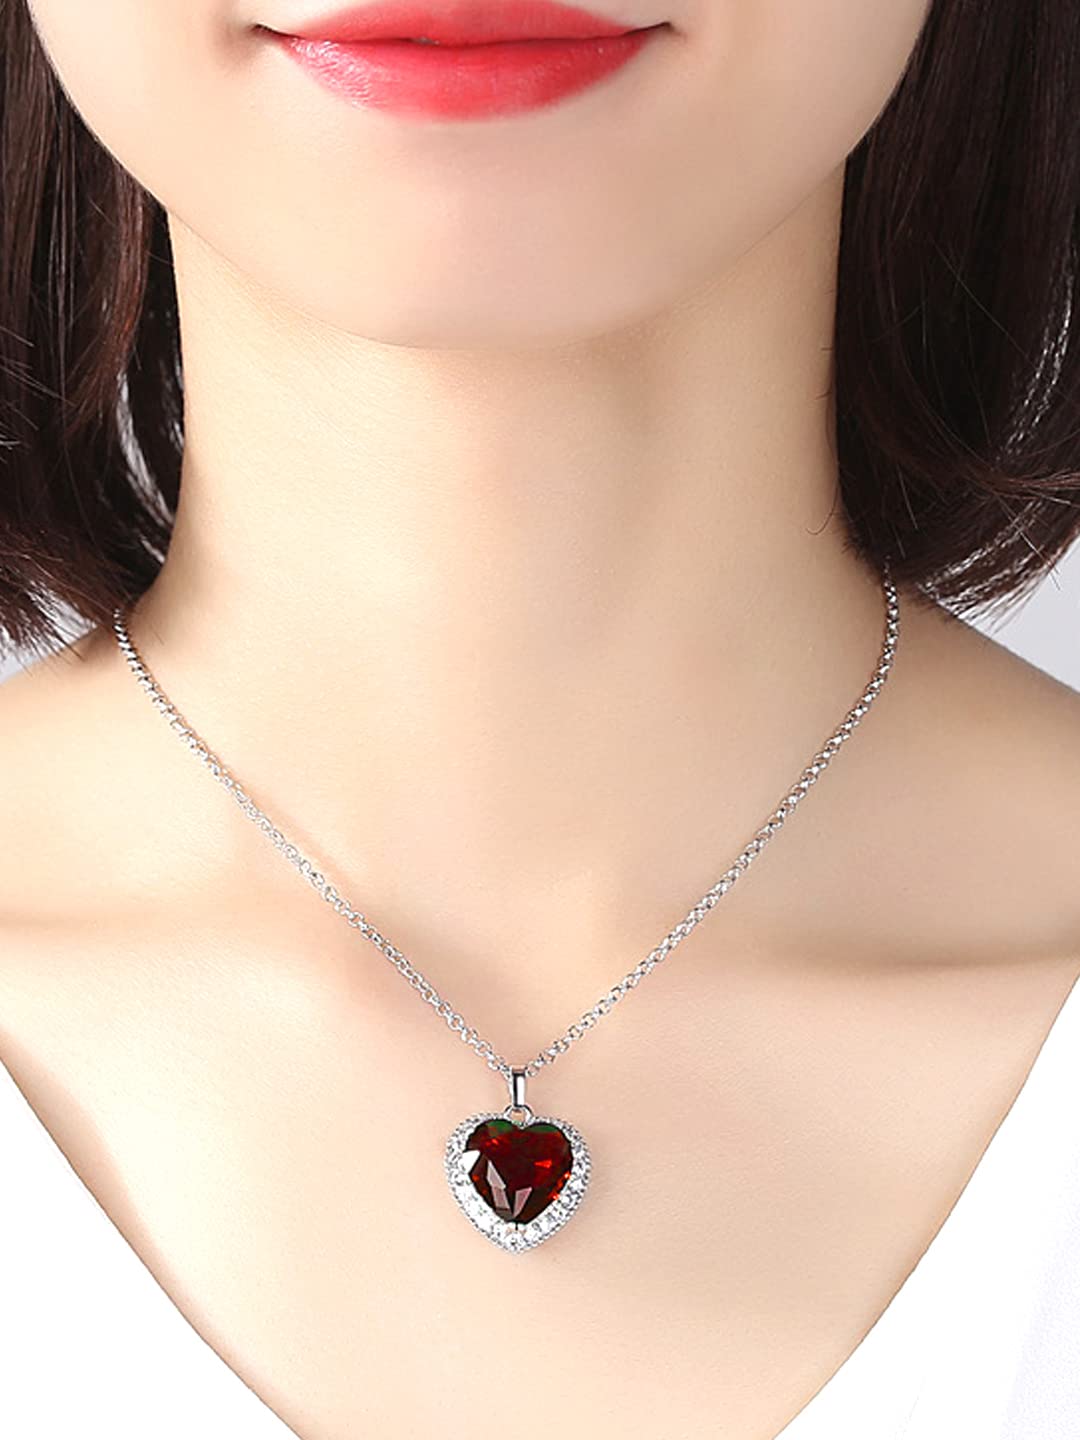 Yellow Chimes Pendant for Women and Girls Crystal Pendant for Women | Heart Shaped Pendant | Red Stone Pendant with Chain| Birthday Gift for girls and women Anniversary Gift for Wife